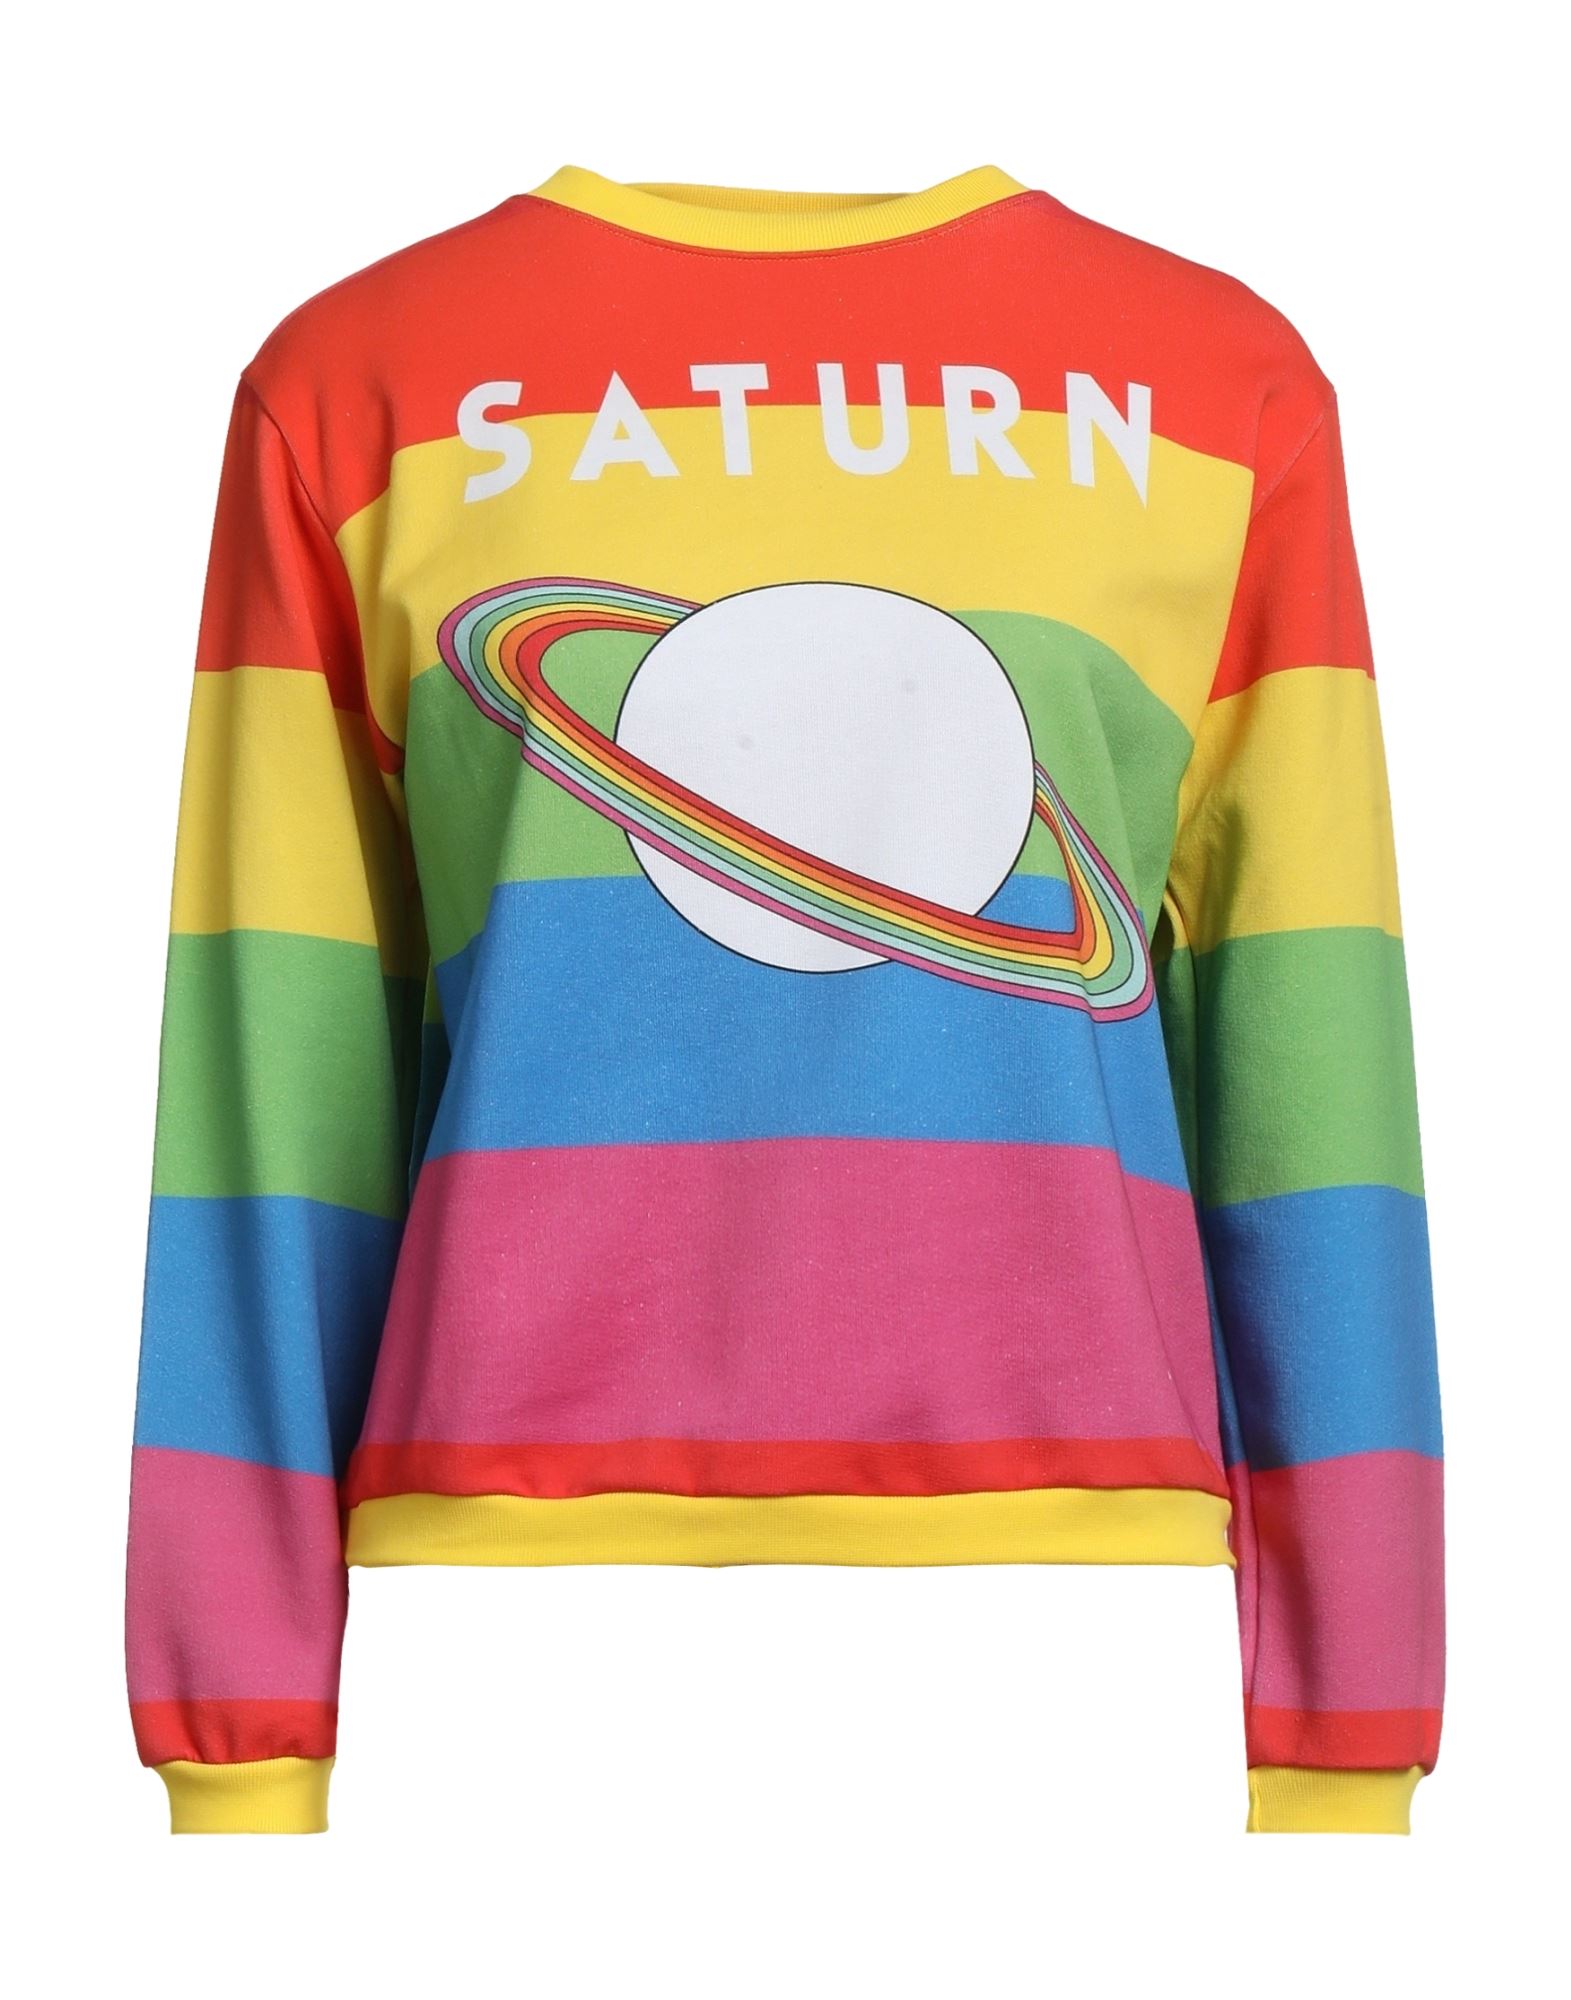 Give Me Space Sweatshirts In Yellow